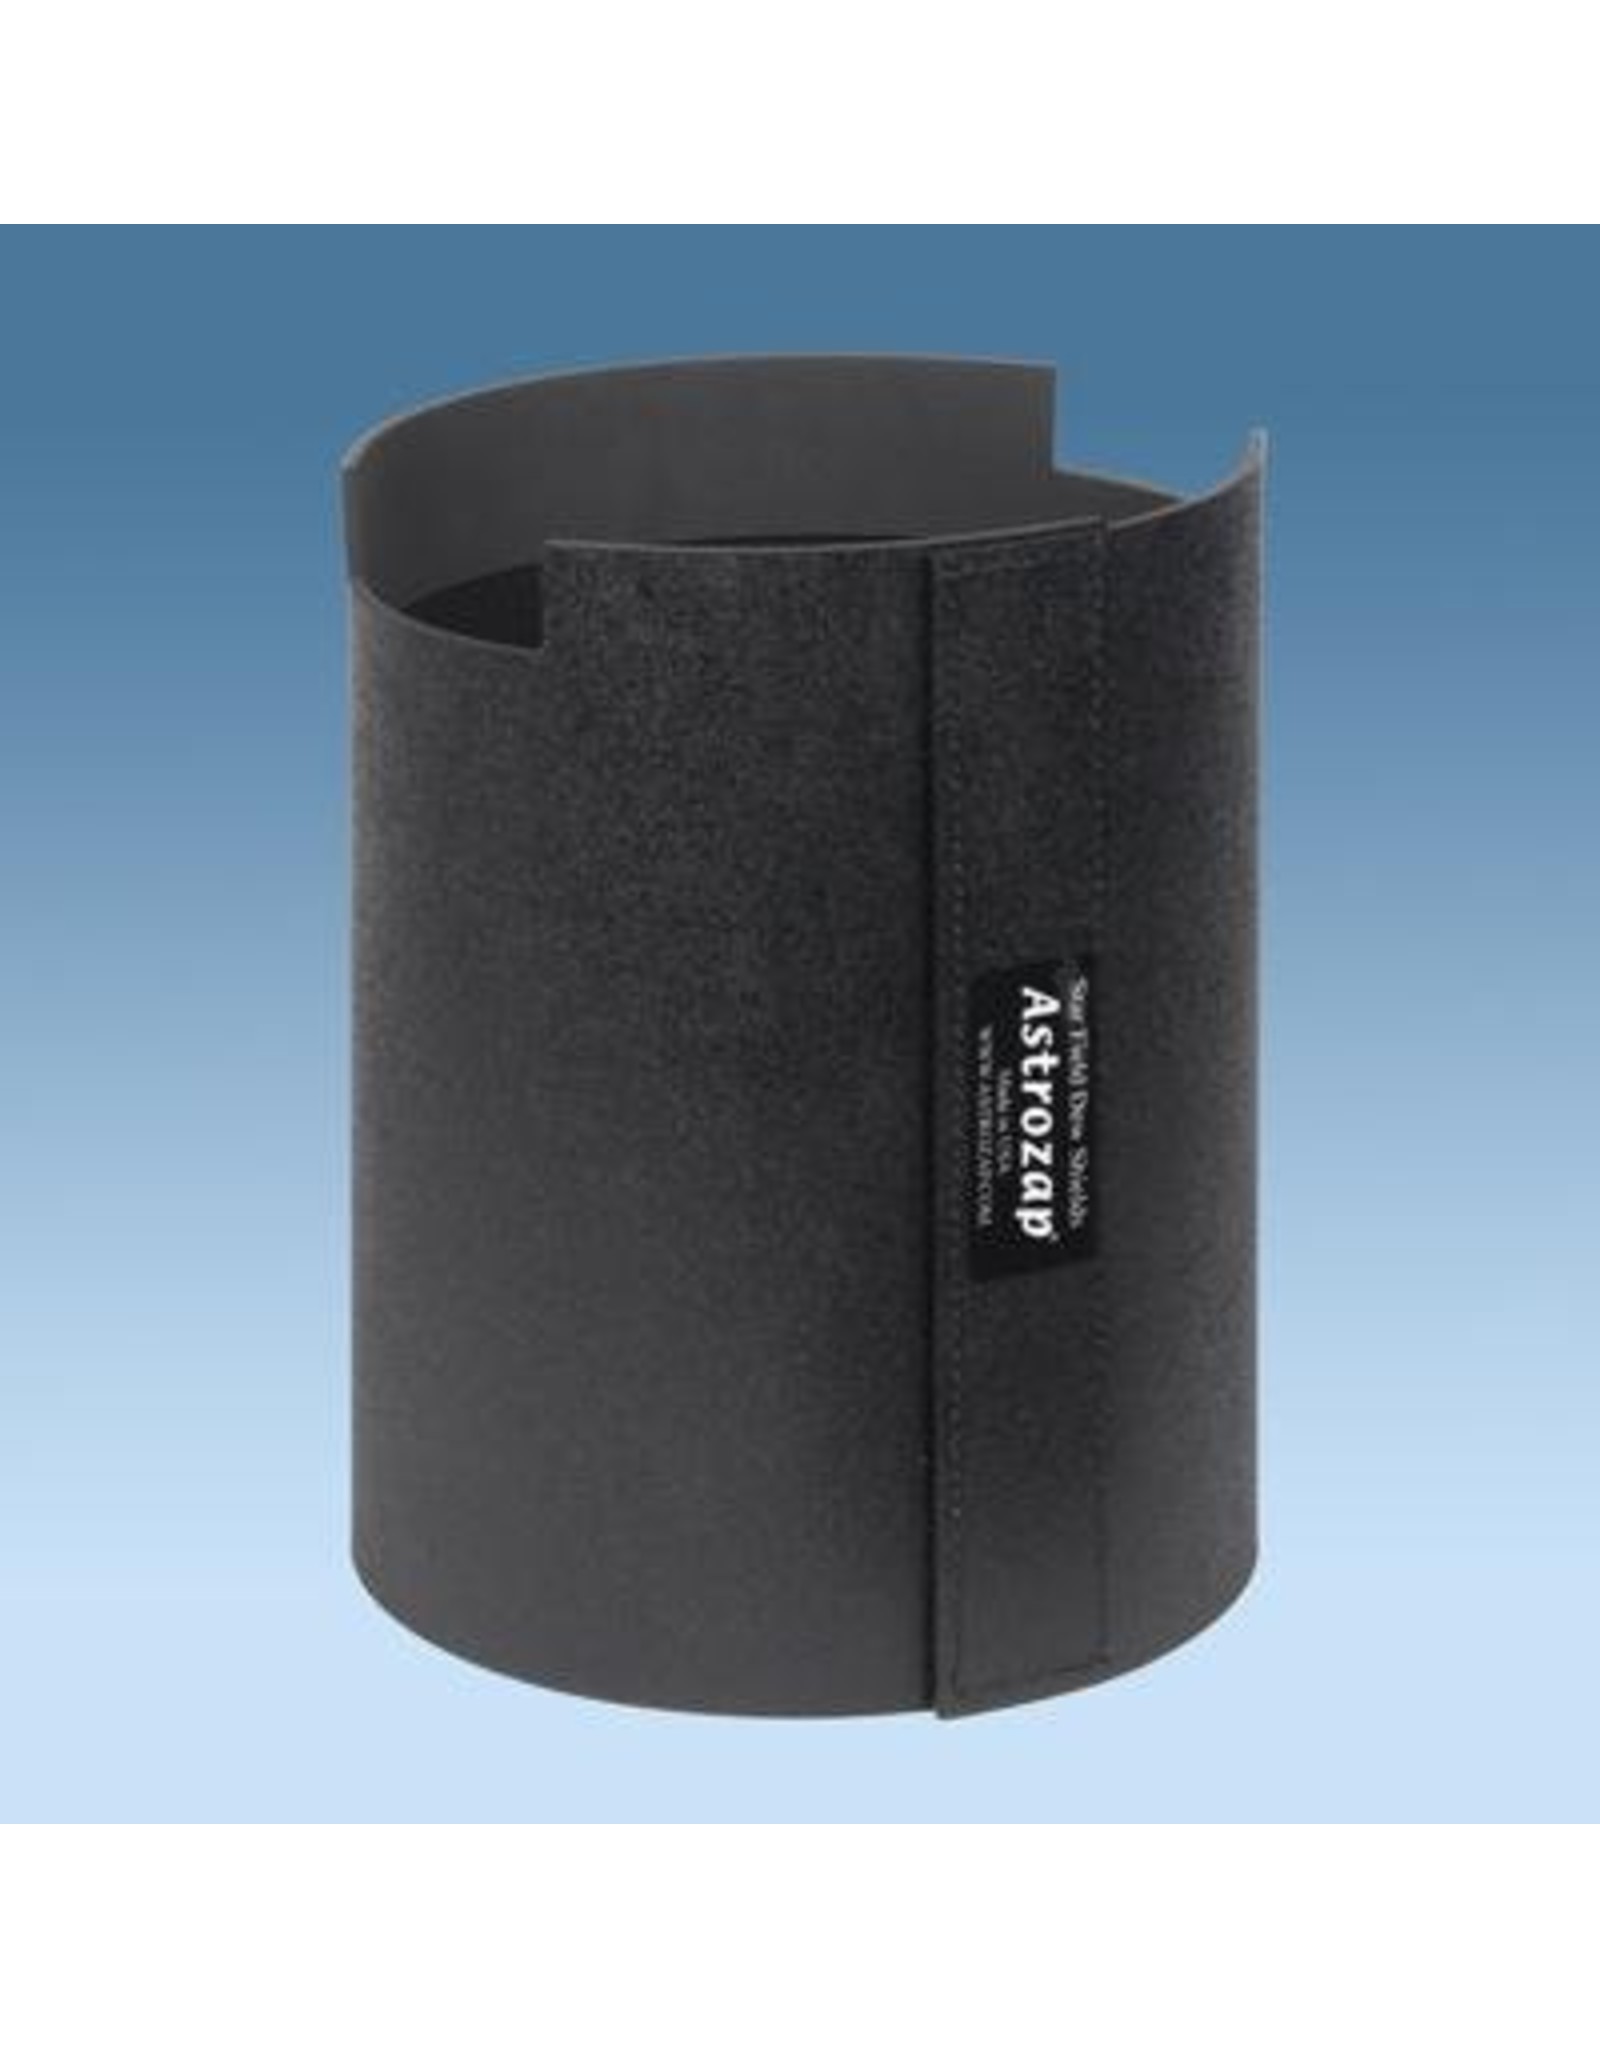 Astrozap Astrozap AZ-150 Flexible Dew Shield for Celestron 9.25 SCT  - with Upper and Lower Dovetail Notches